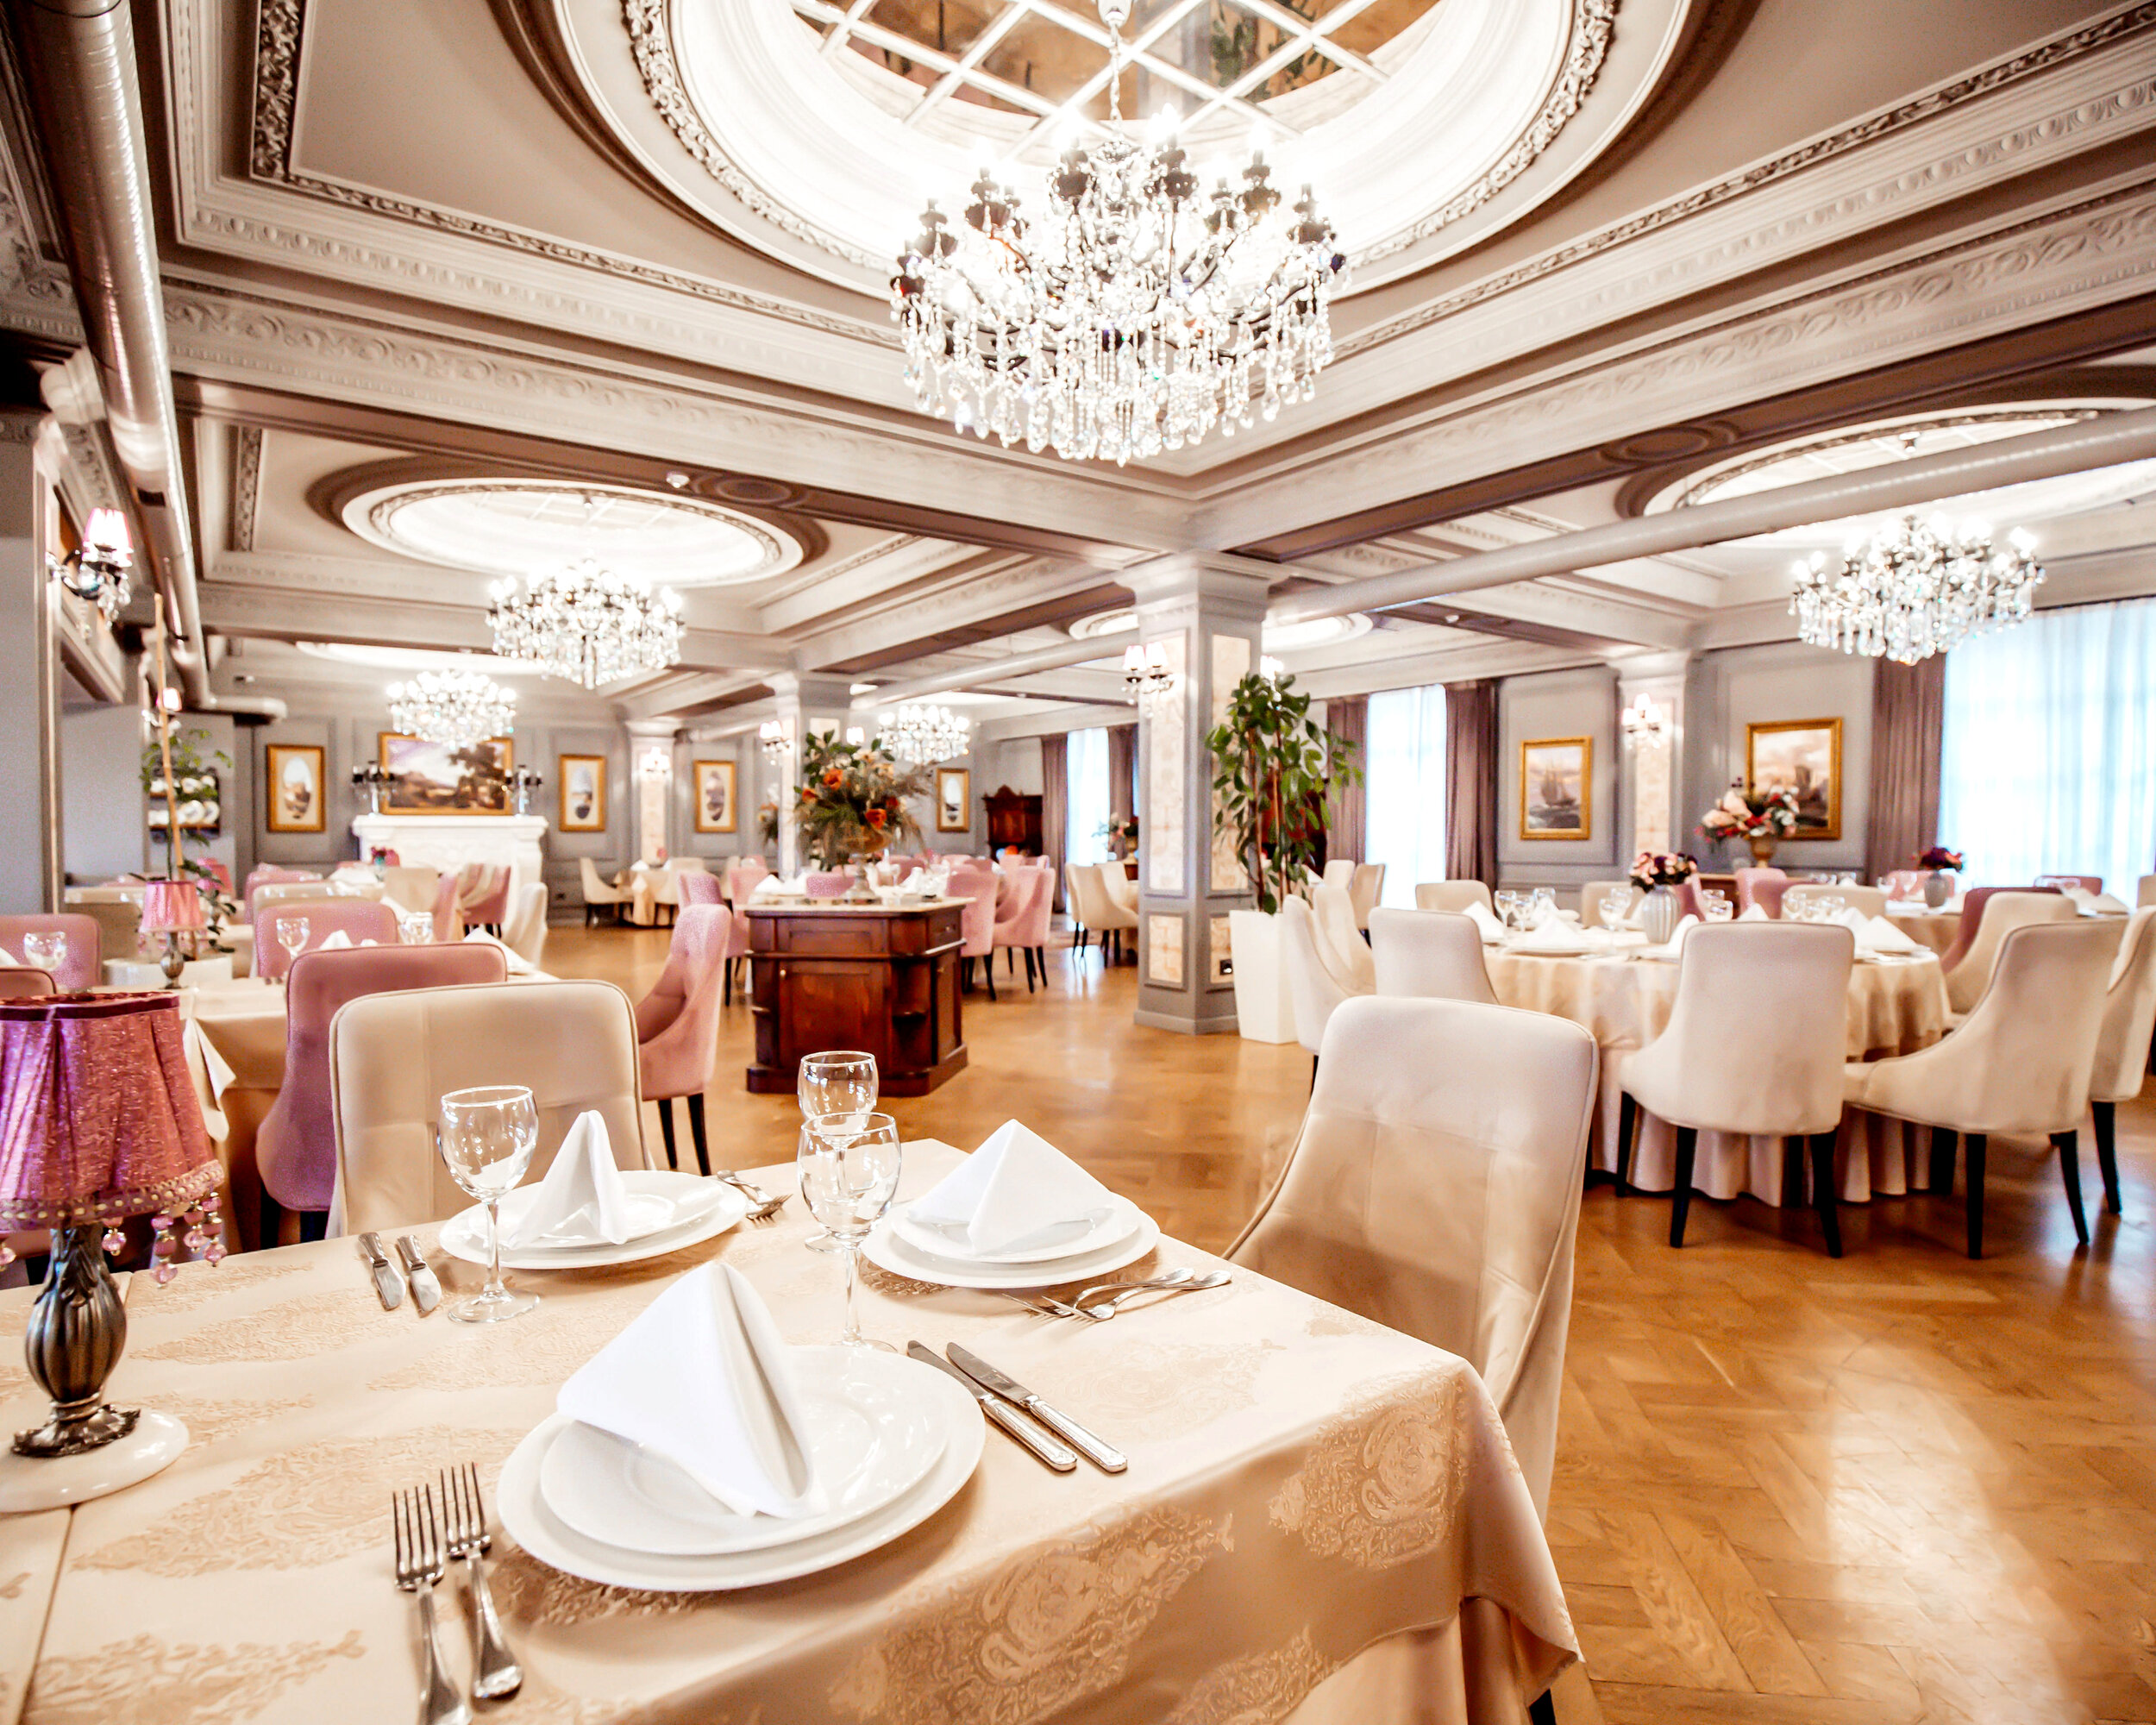 restaurant-hall-with-round-square-tables-some-chairs-plants.jpg